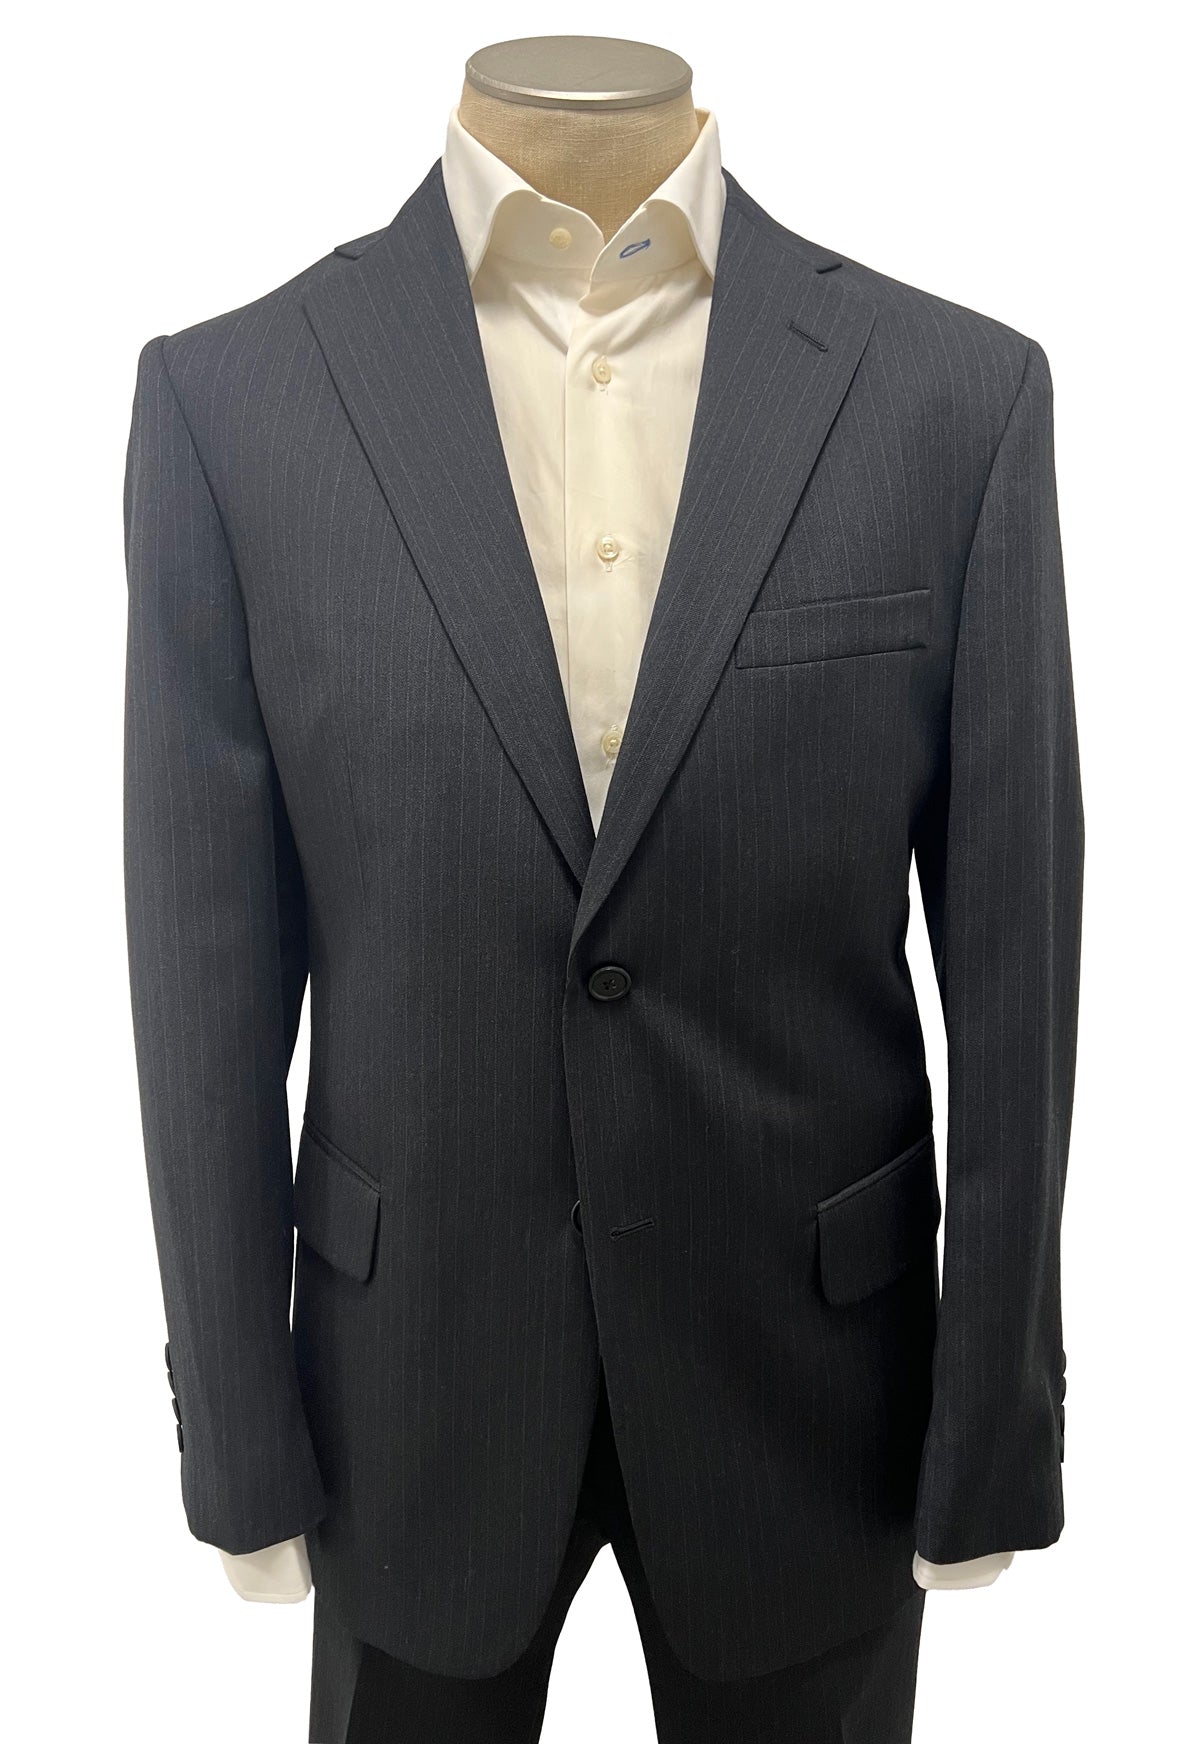 Men's Flat Front Pant Nested Suit Classic Cut - GREY STRIPE - 100% WORSTED WOOL